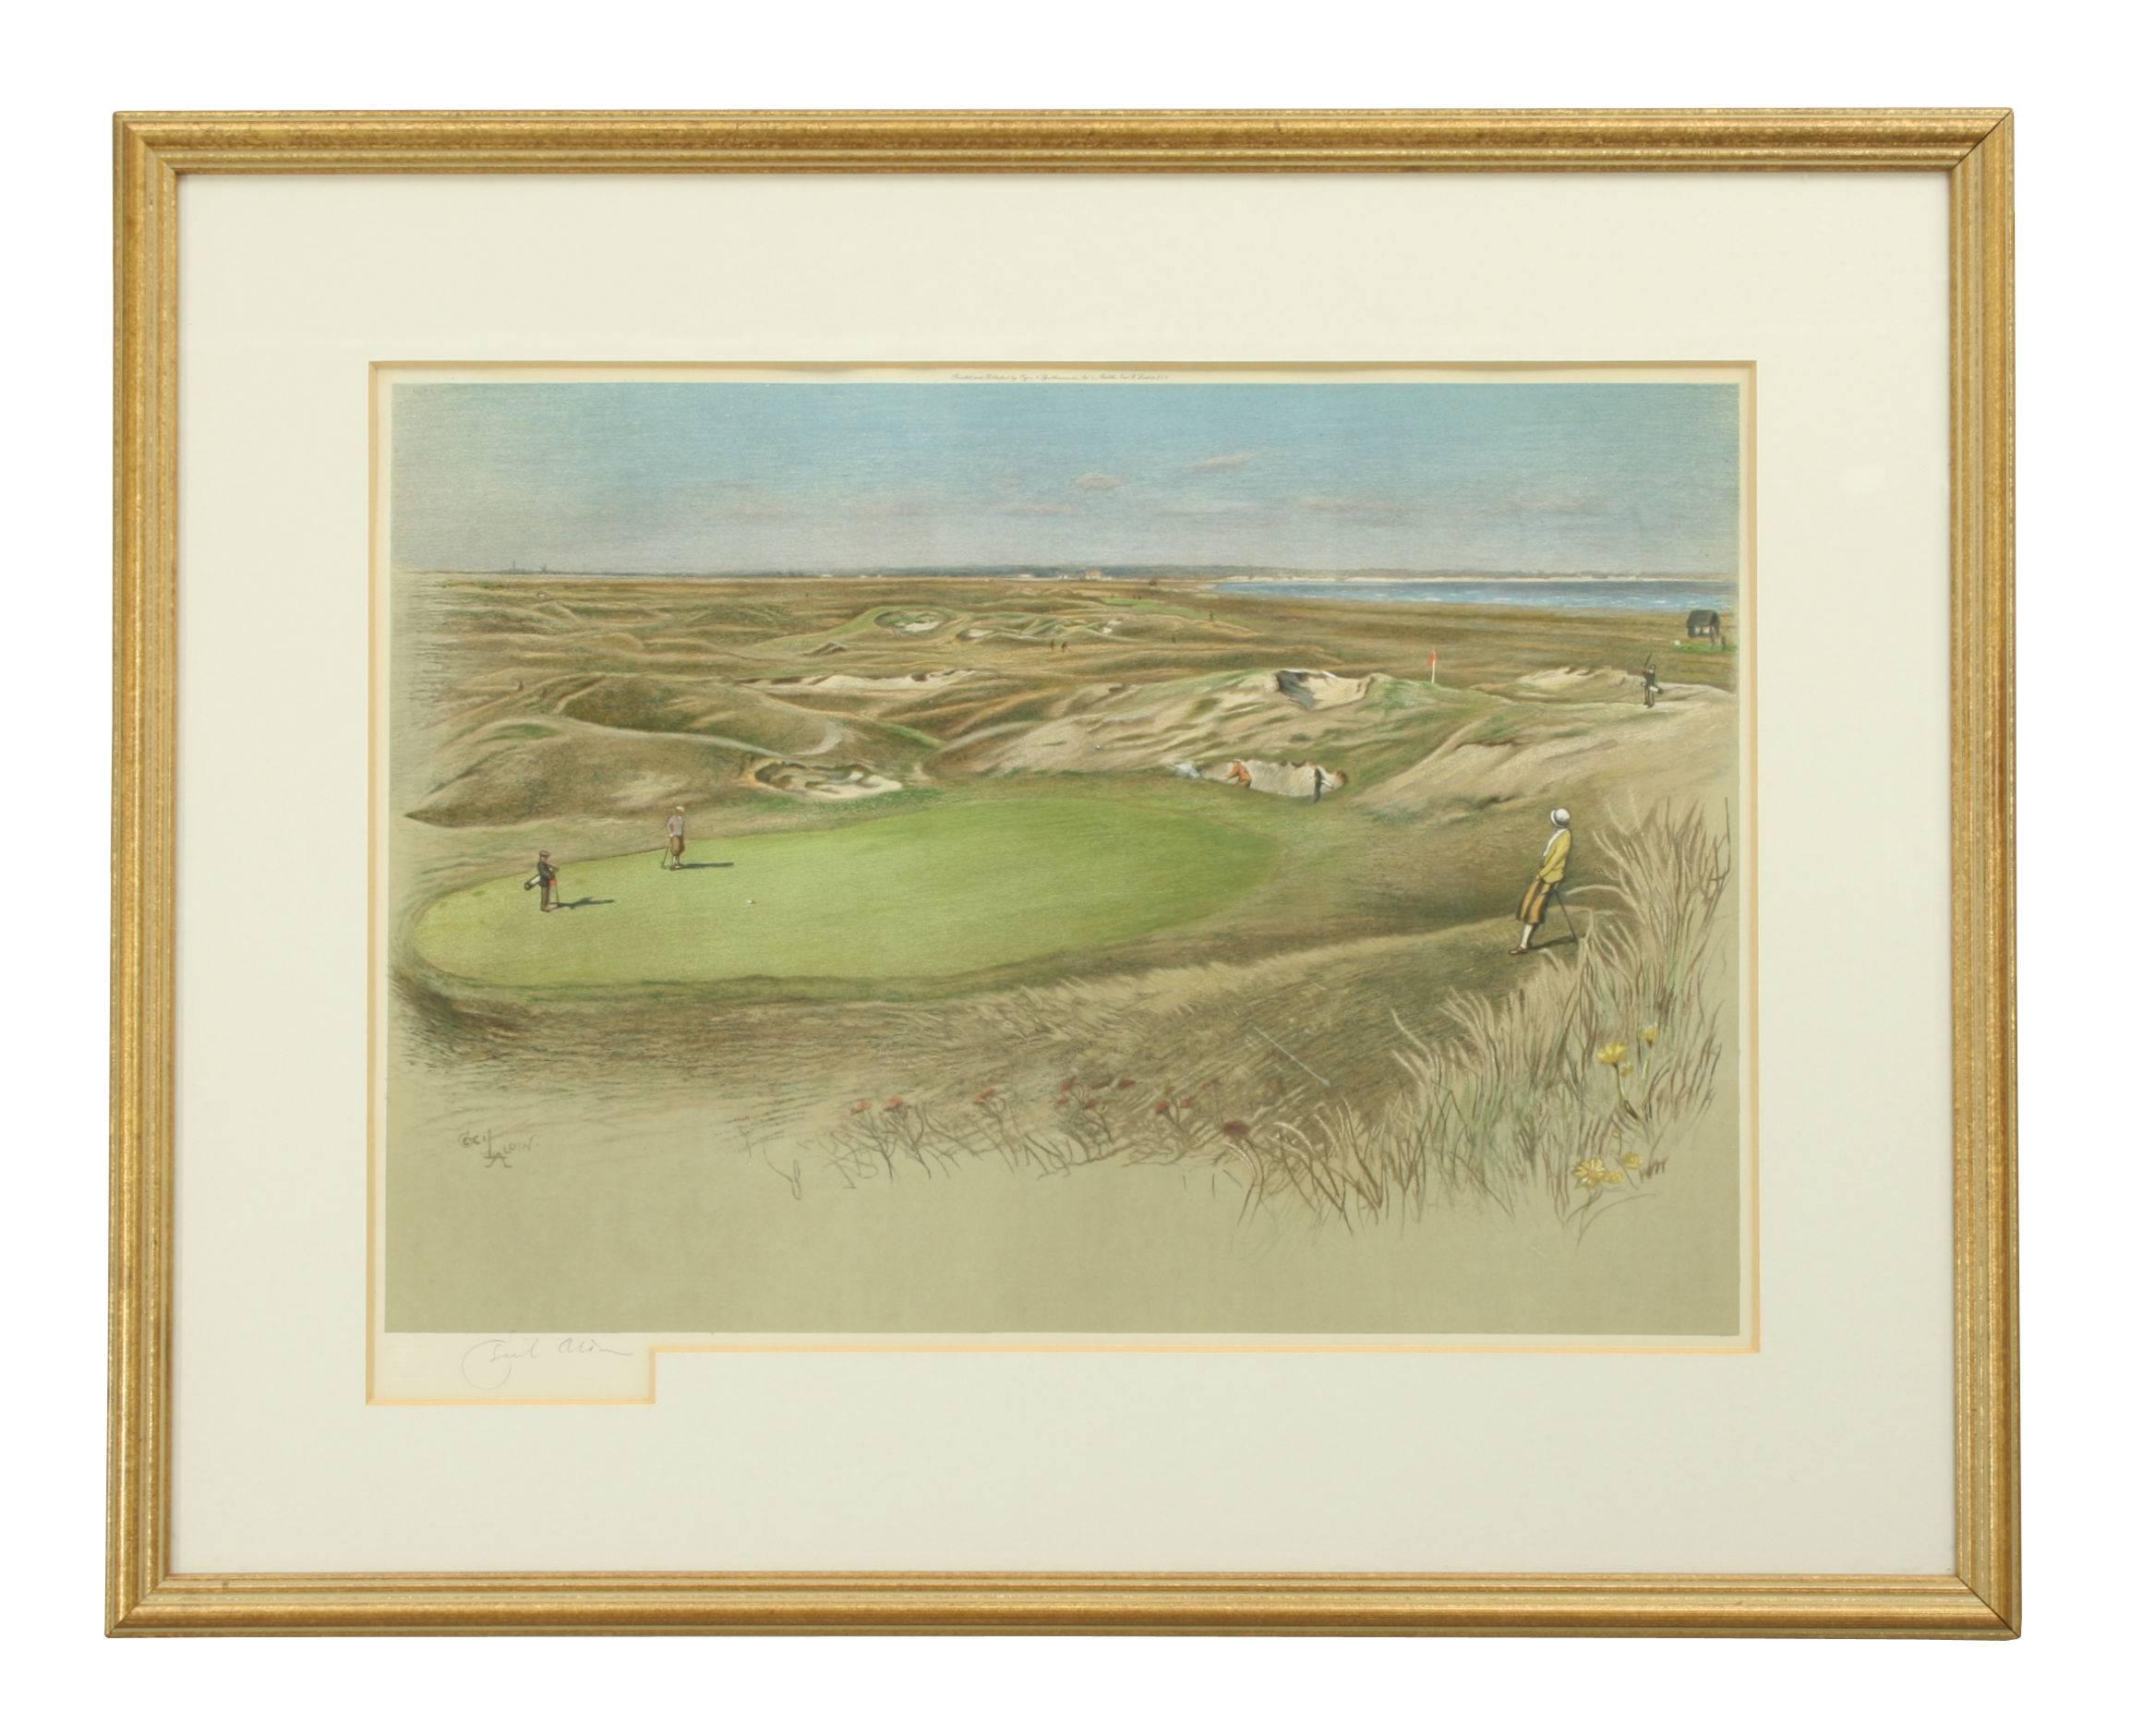 Royal St. George's after Cecil Aldin.
A mounted and framed golf photolithograph of Royal St. George's, Sandwich, 'The Maiden' green after C. Aldin. Signed in pencil by the artist. Printed and published by Eyre & Spottiswoode, Ltd., His Majesty's